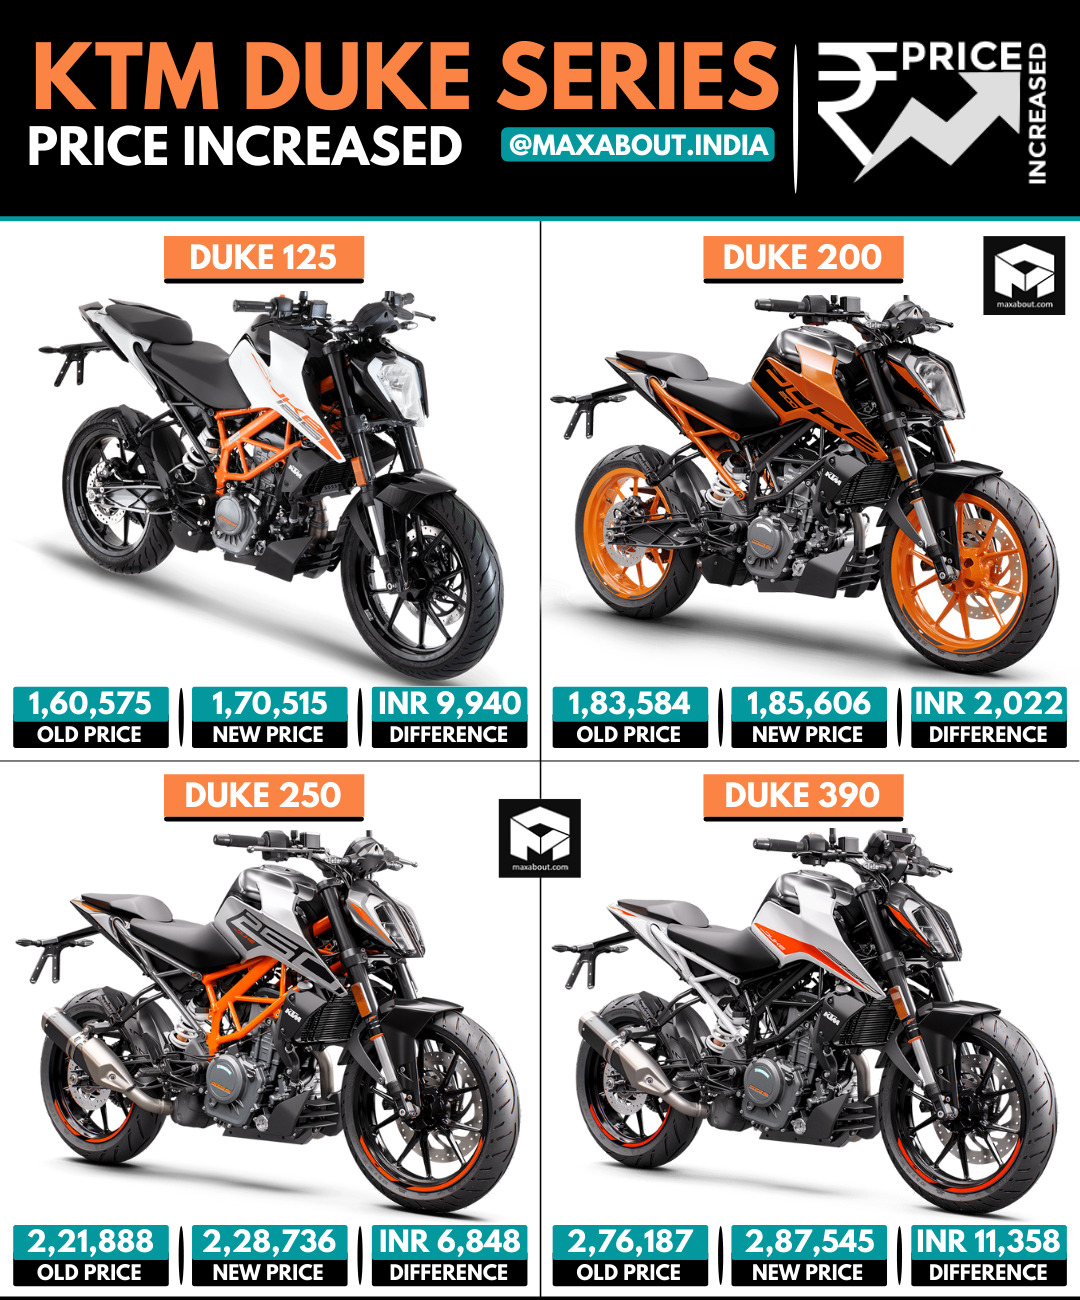 KTM Duke Series Price Increased by up to INR 11,358